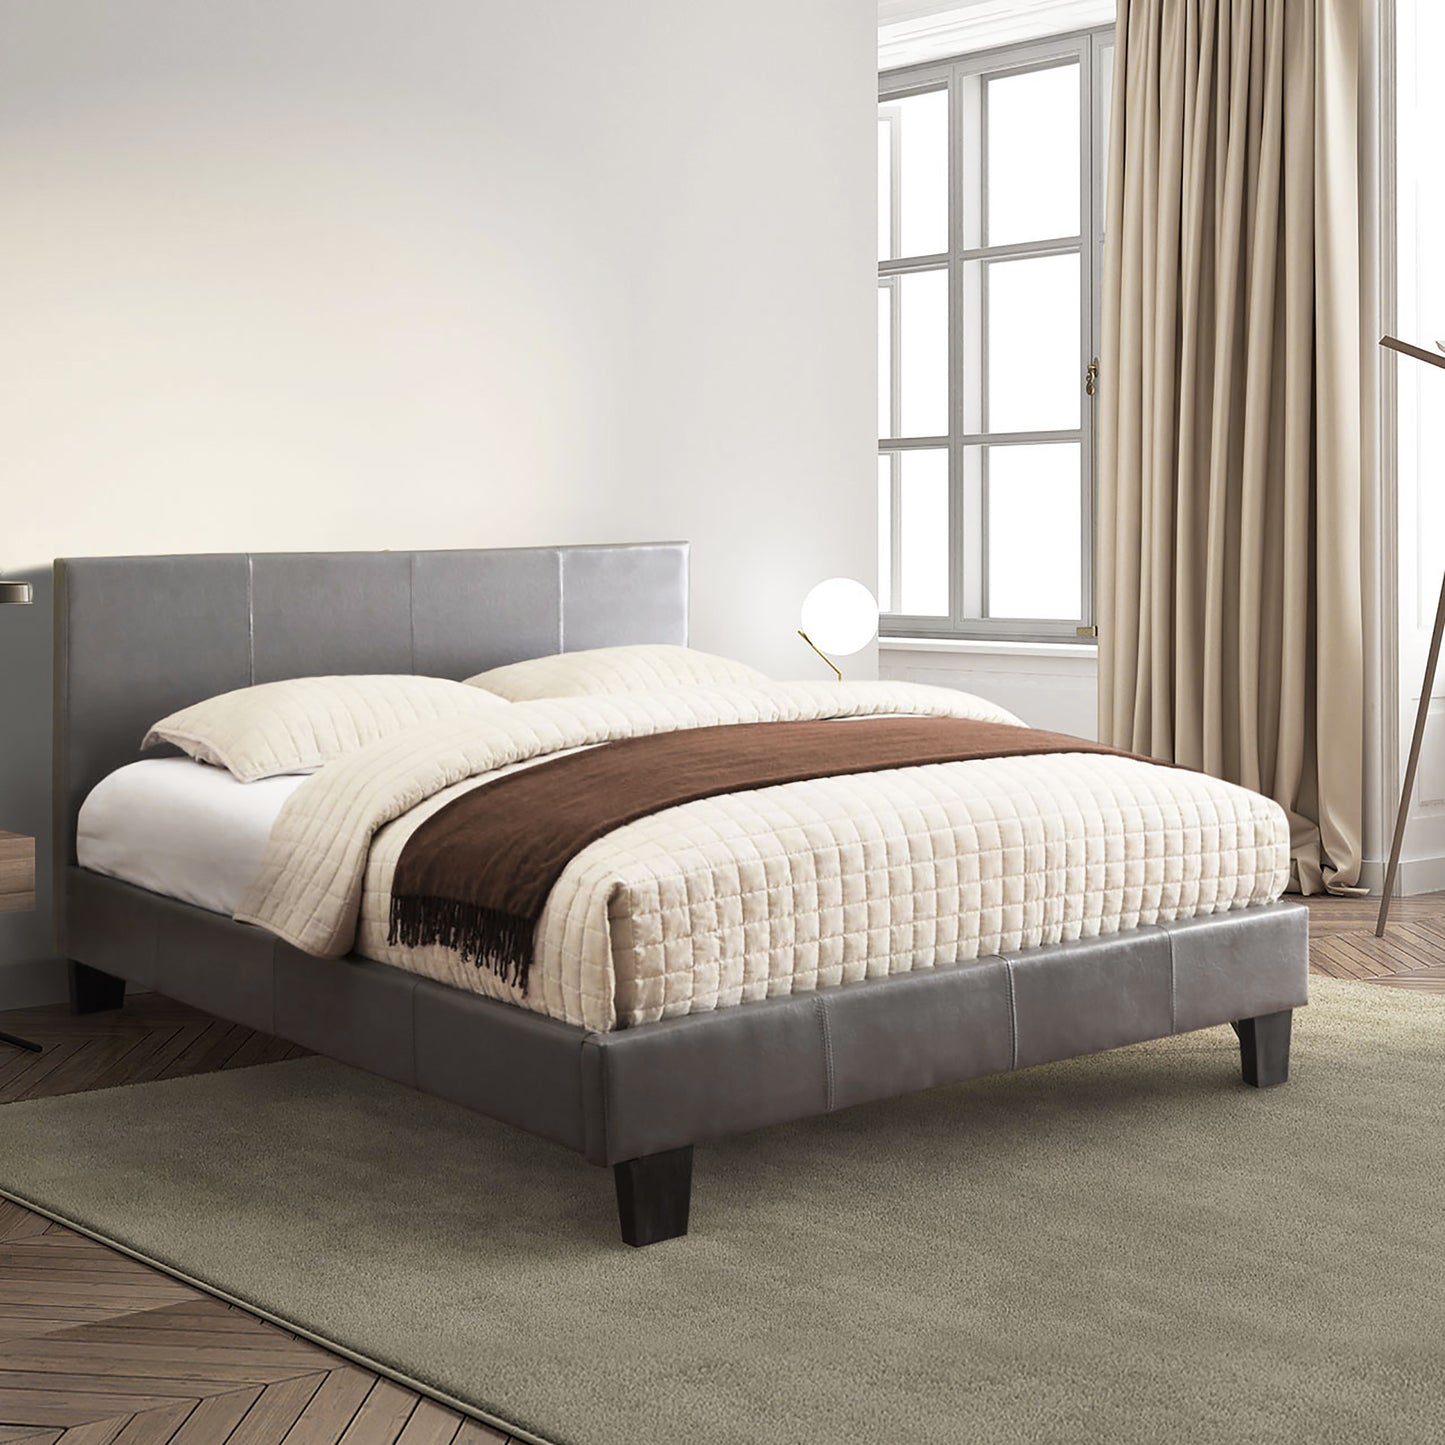 Right angled contemporary gray faux leather twin platform bed in a bedroom with accessories